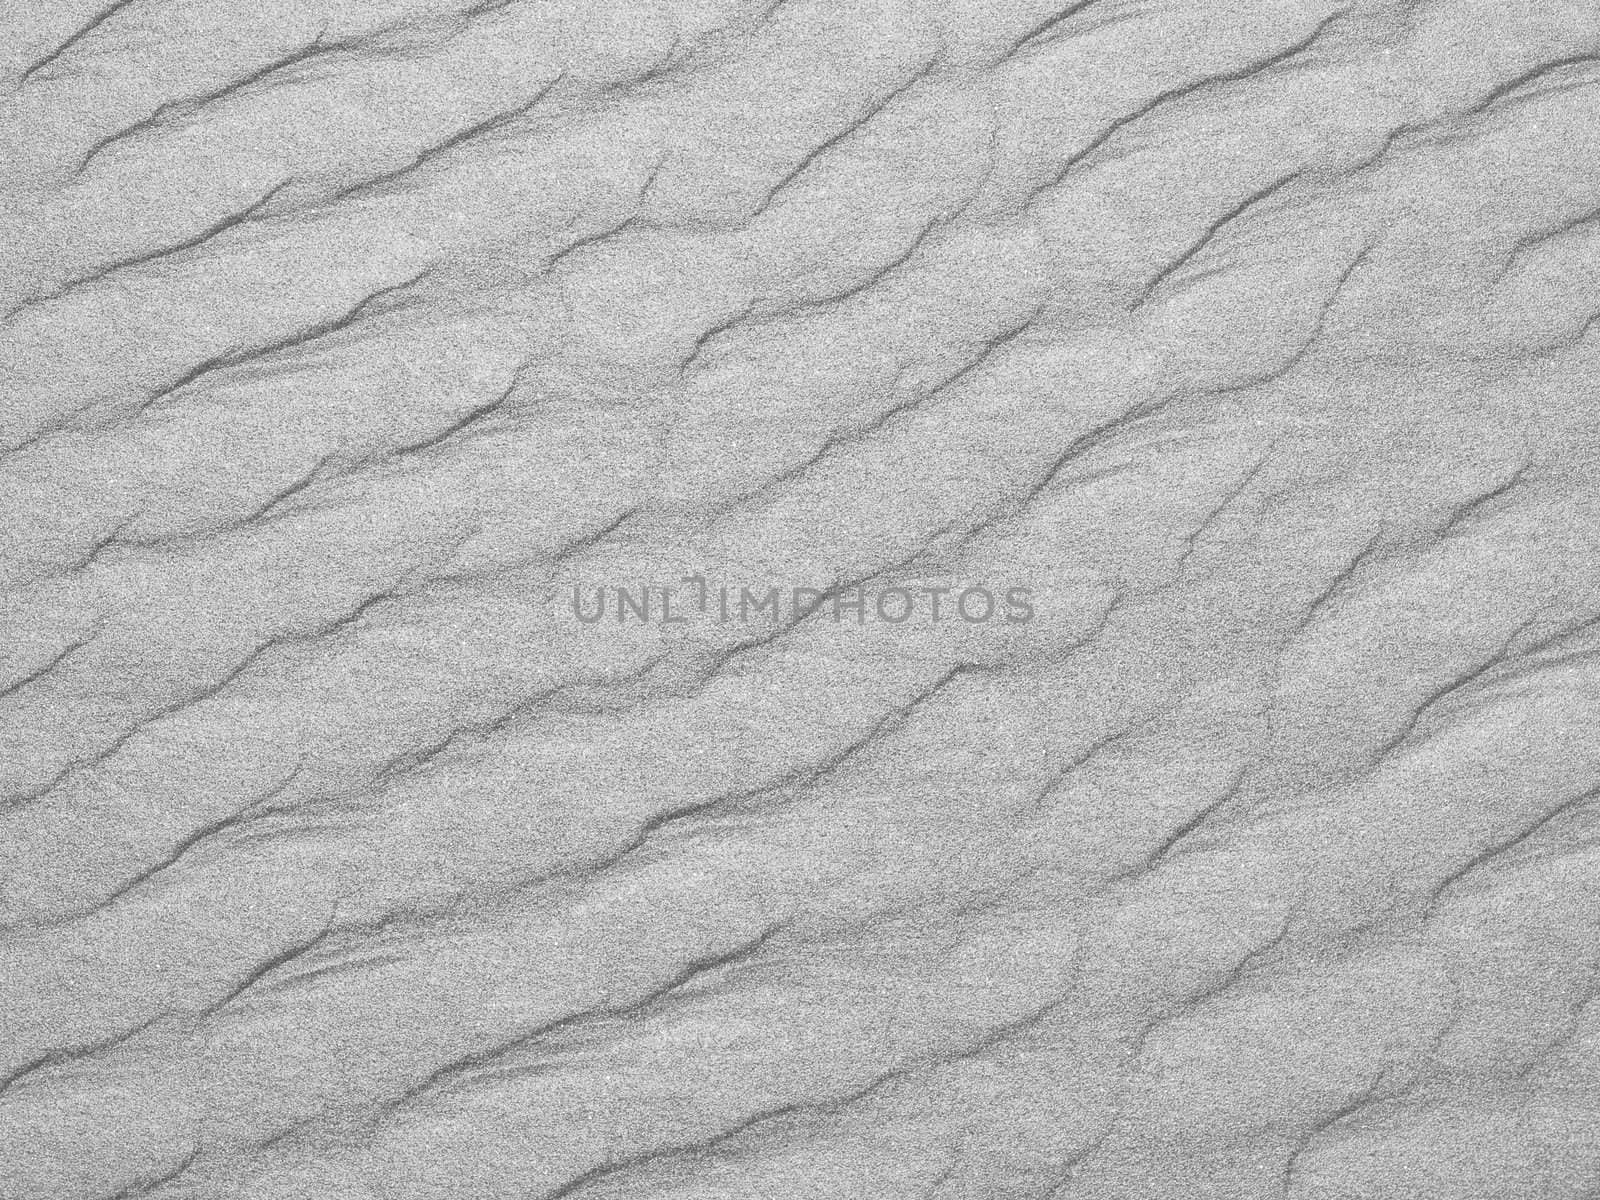 Abstract background of white sand ripples at the beach 